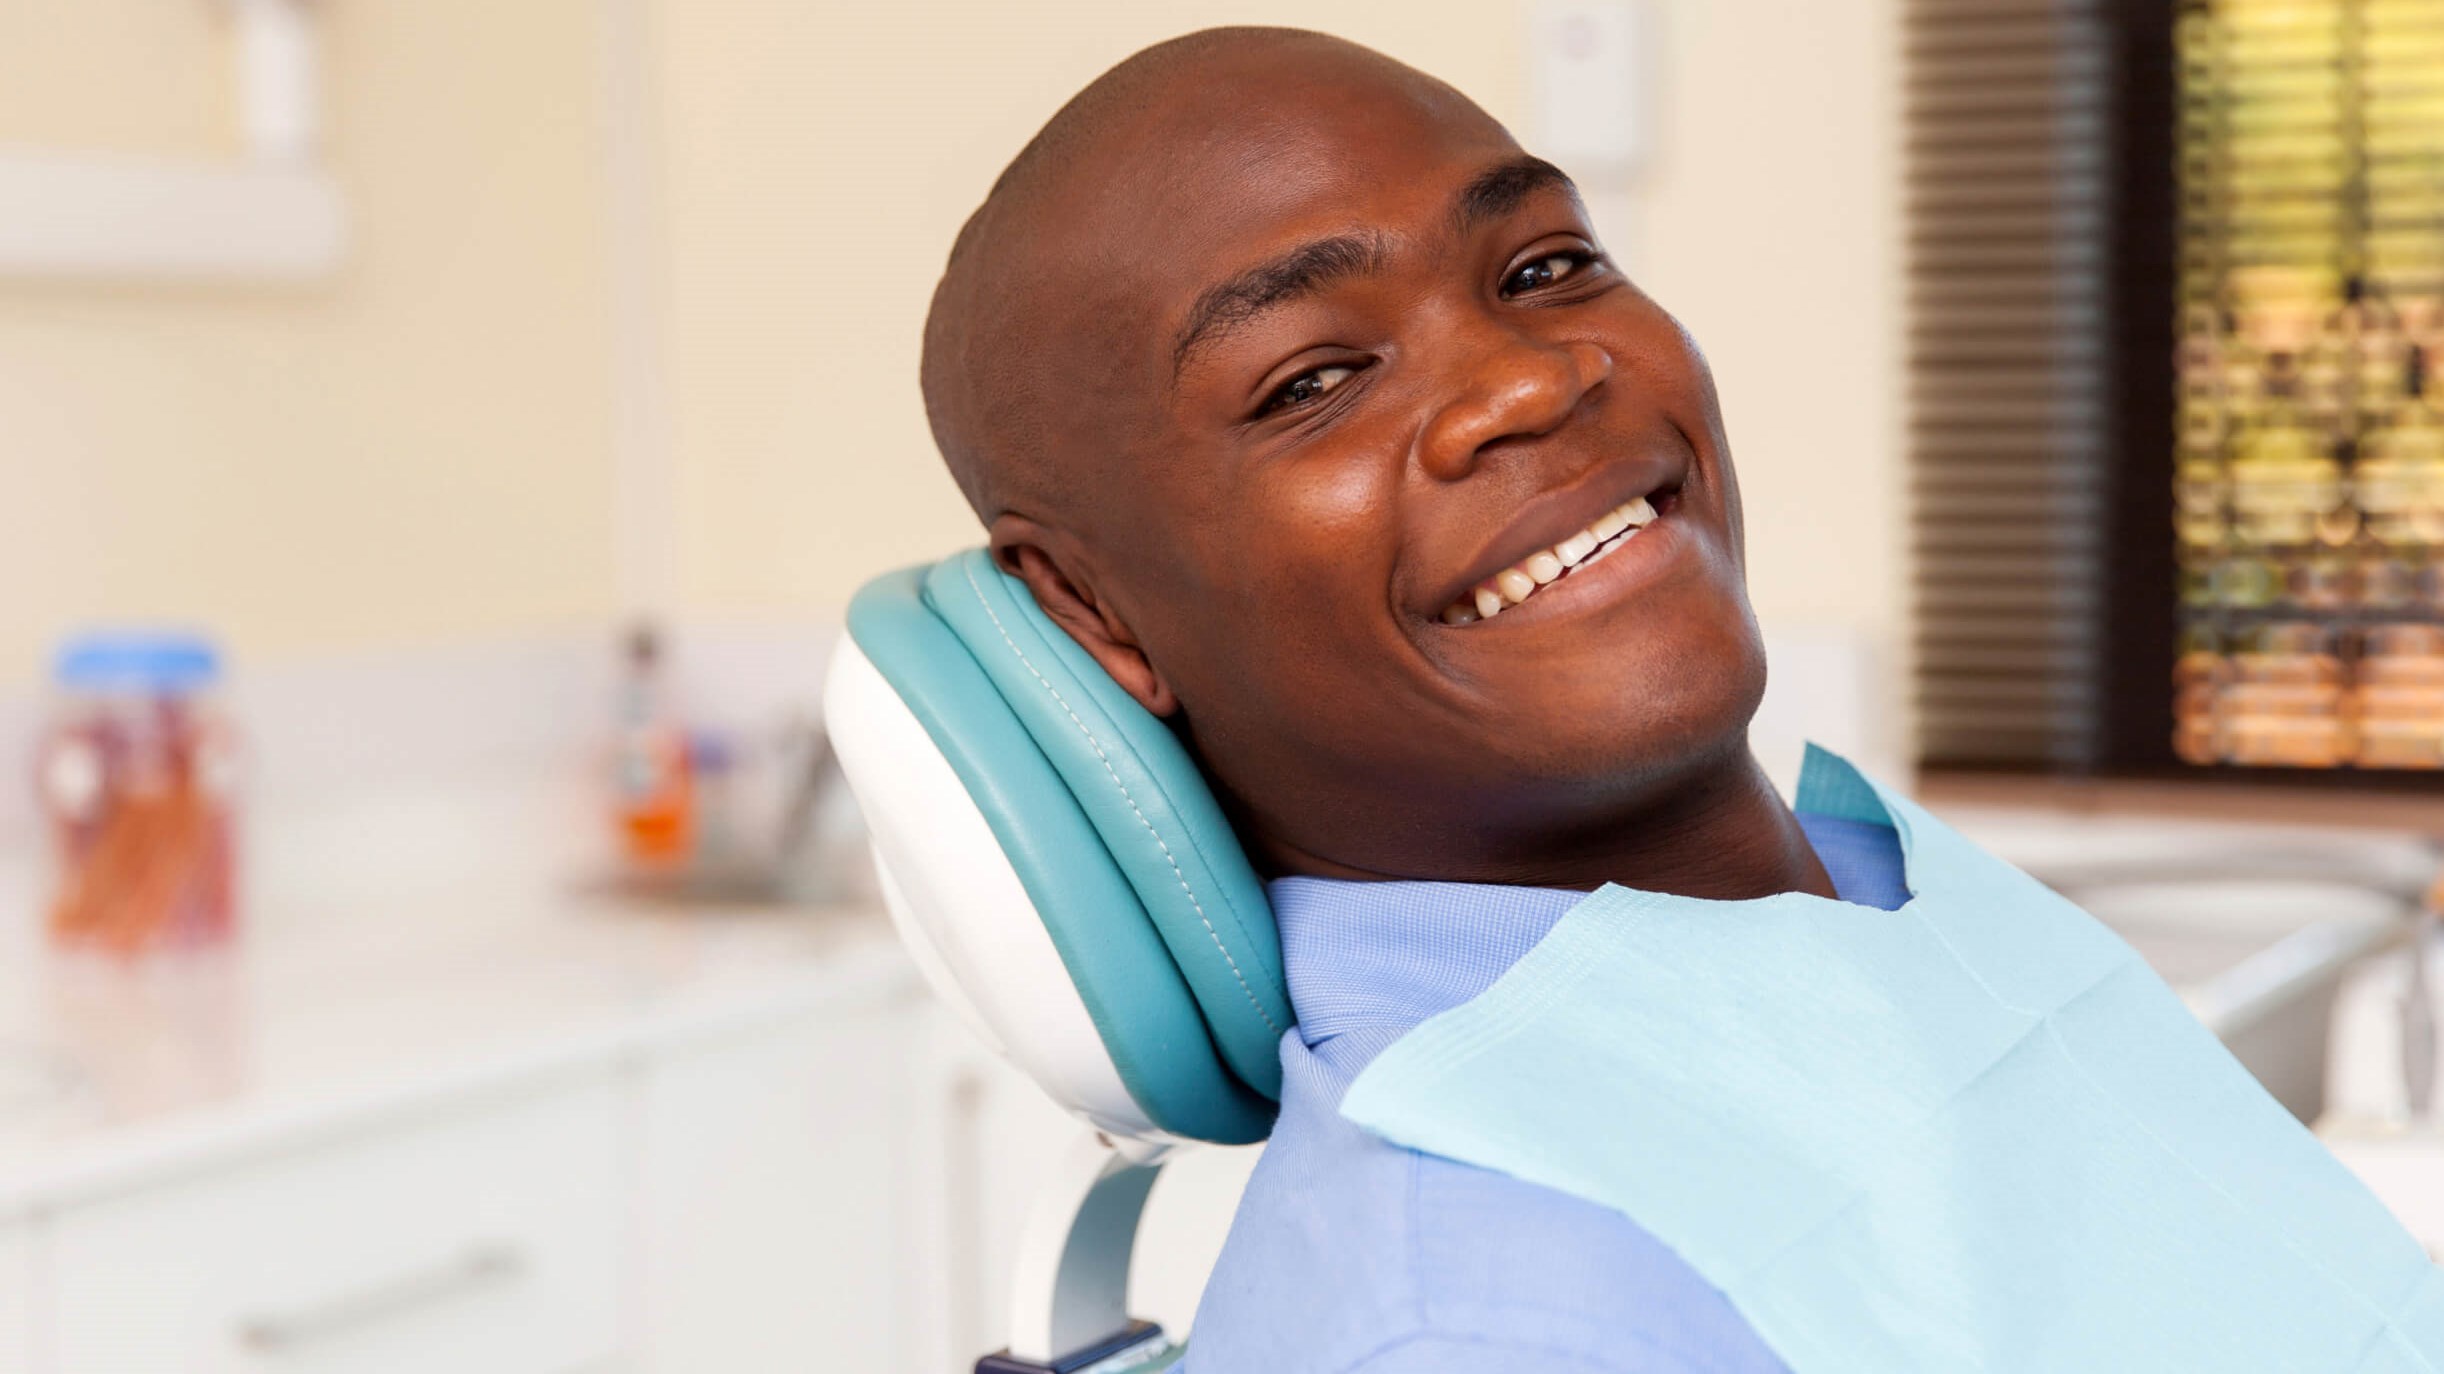 What are Dental Implants? How much do dental implants cost?